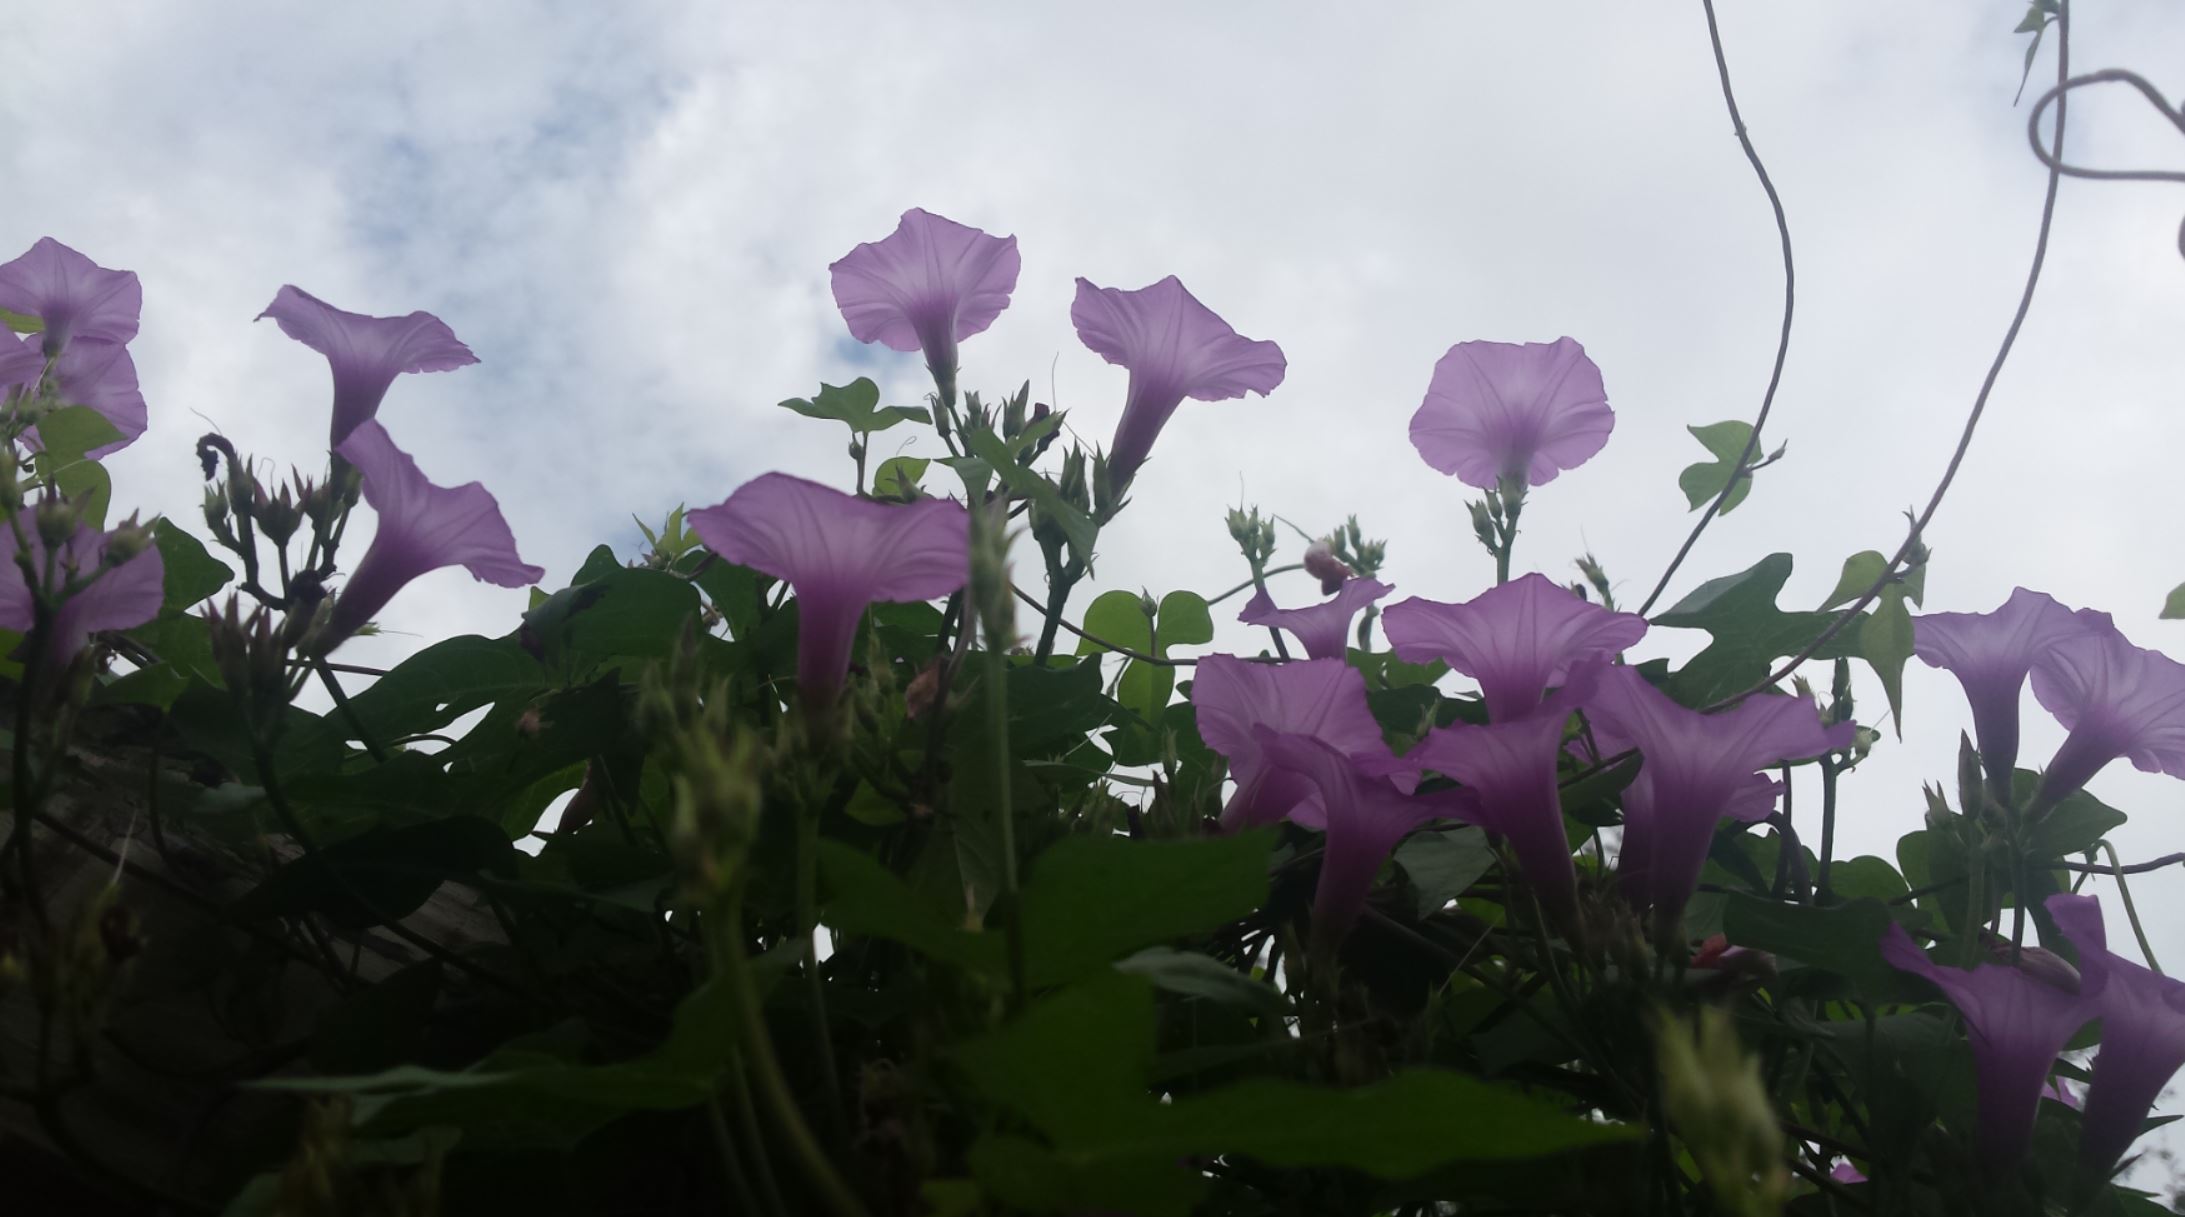 purple morning glories raise their heads to the white and blue sky in praise to God